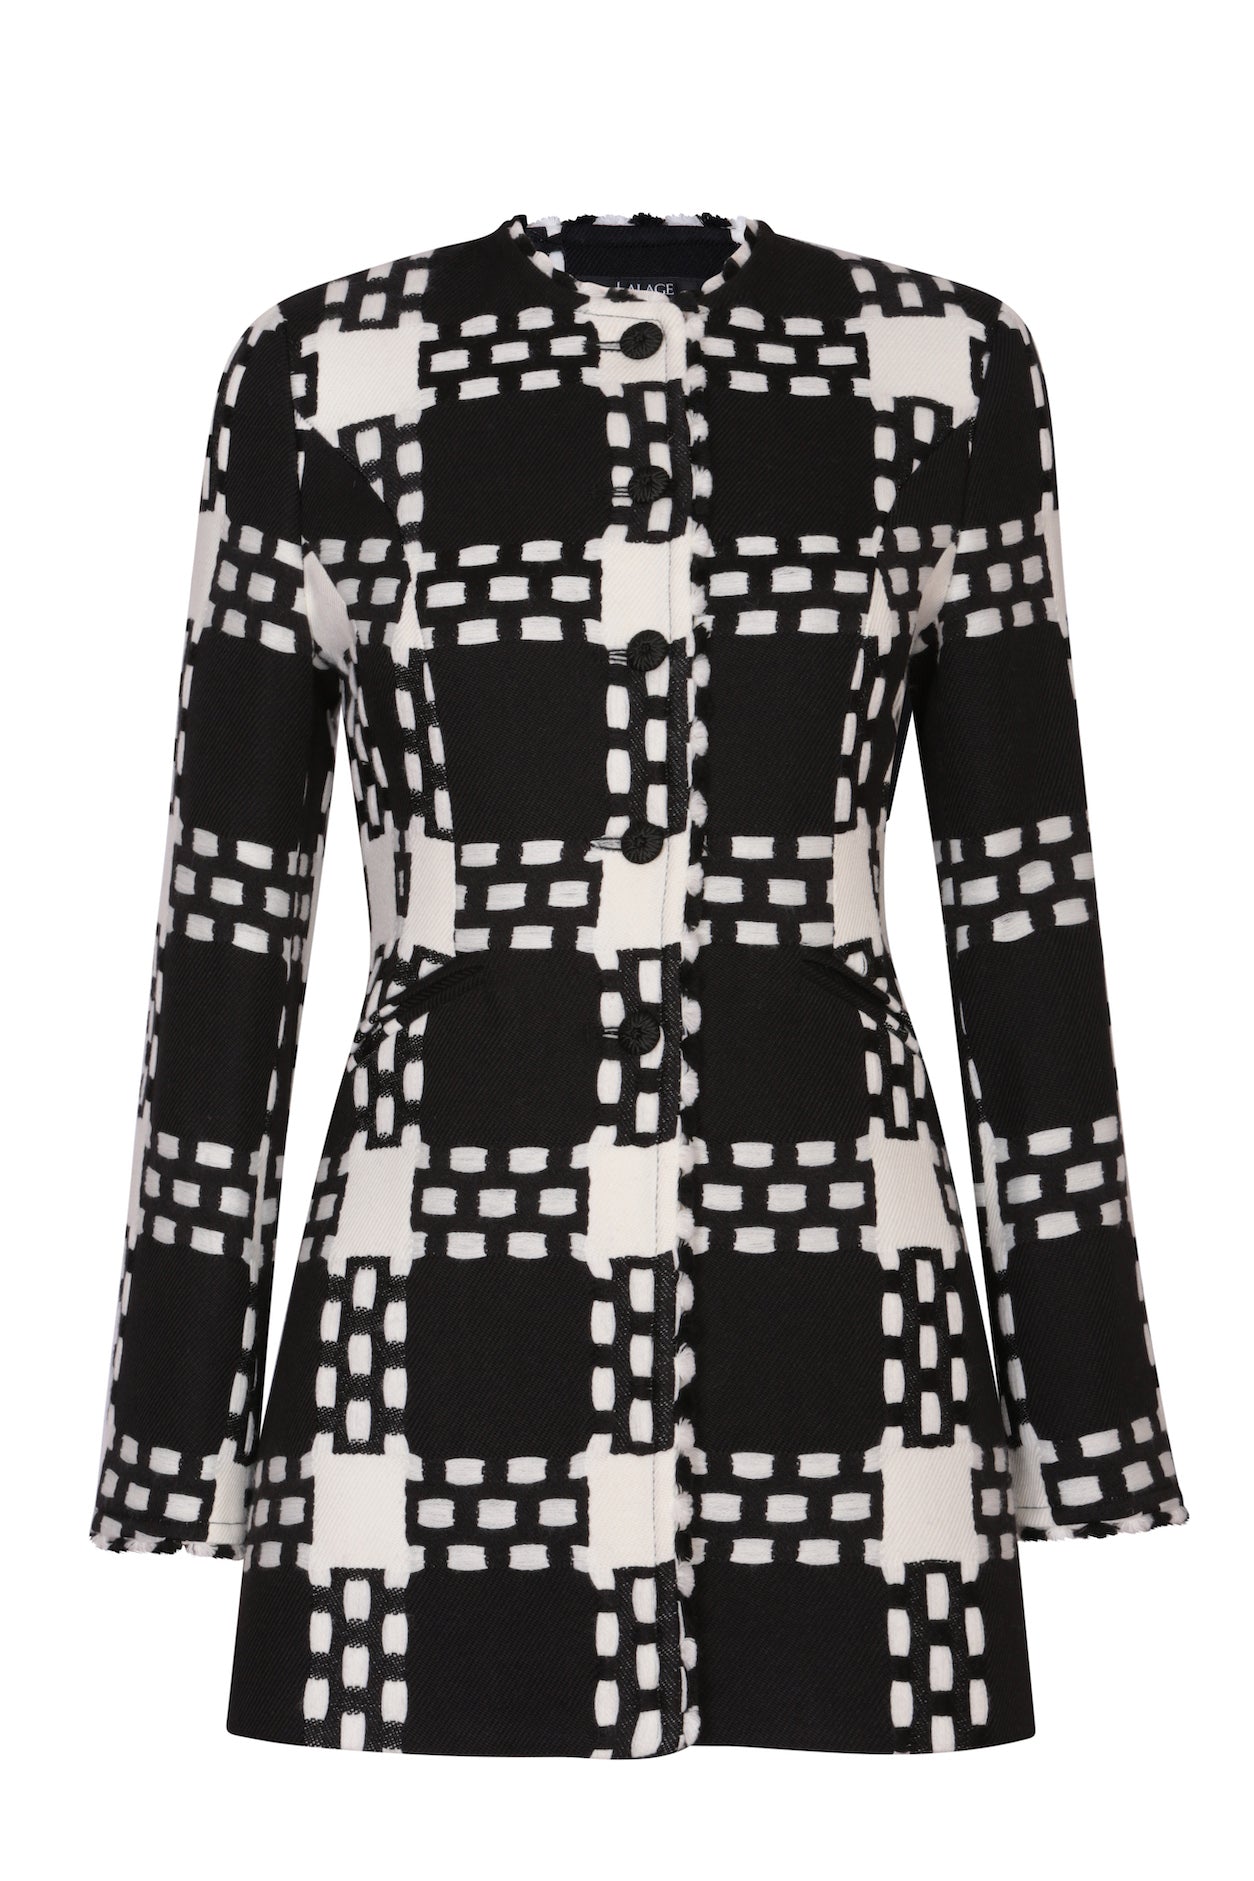 Long Jacket in Black and White Giant Check - Serena